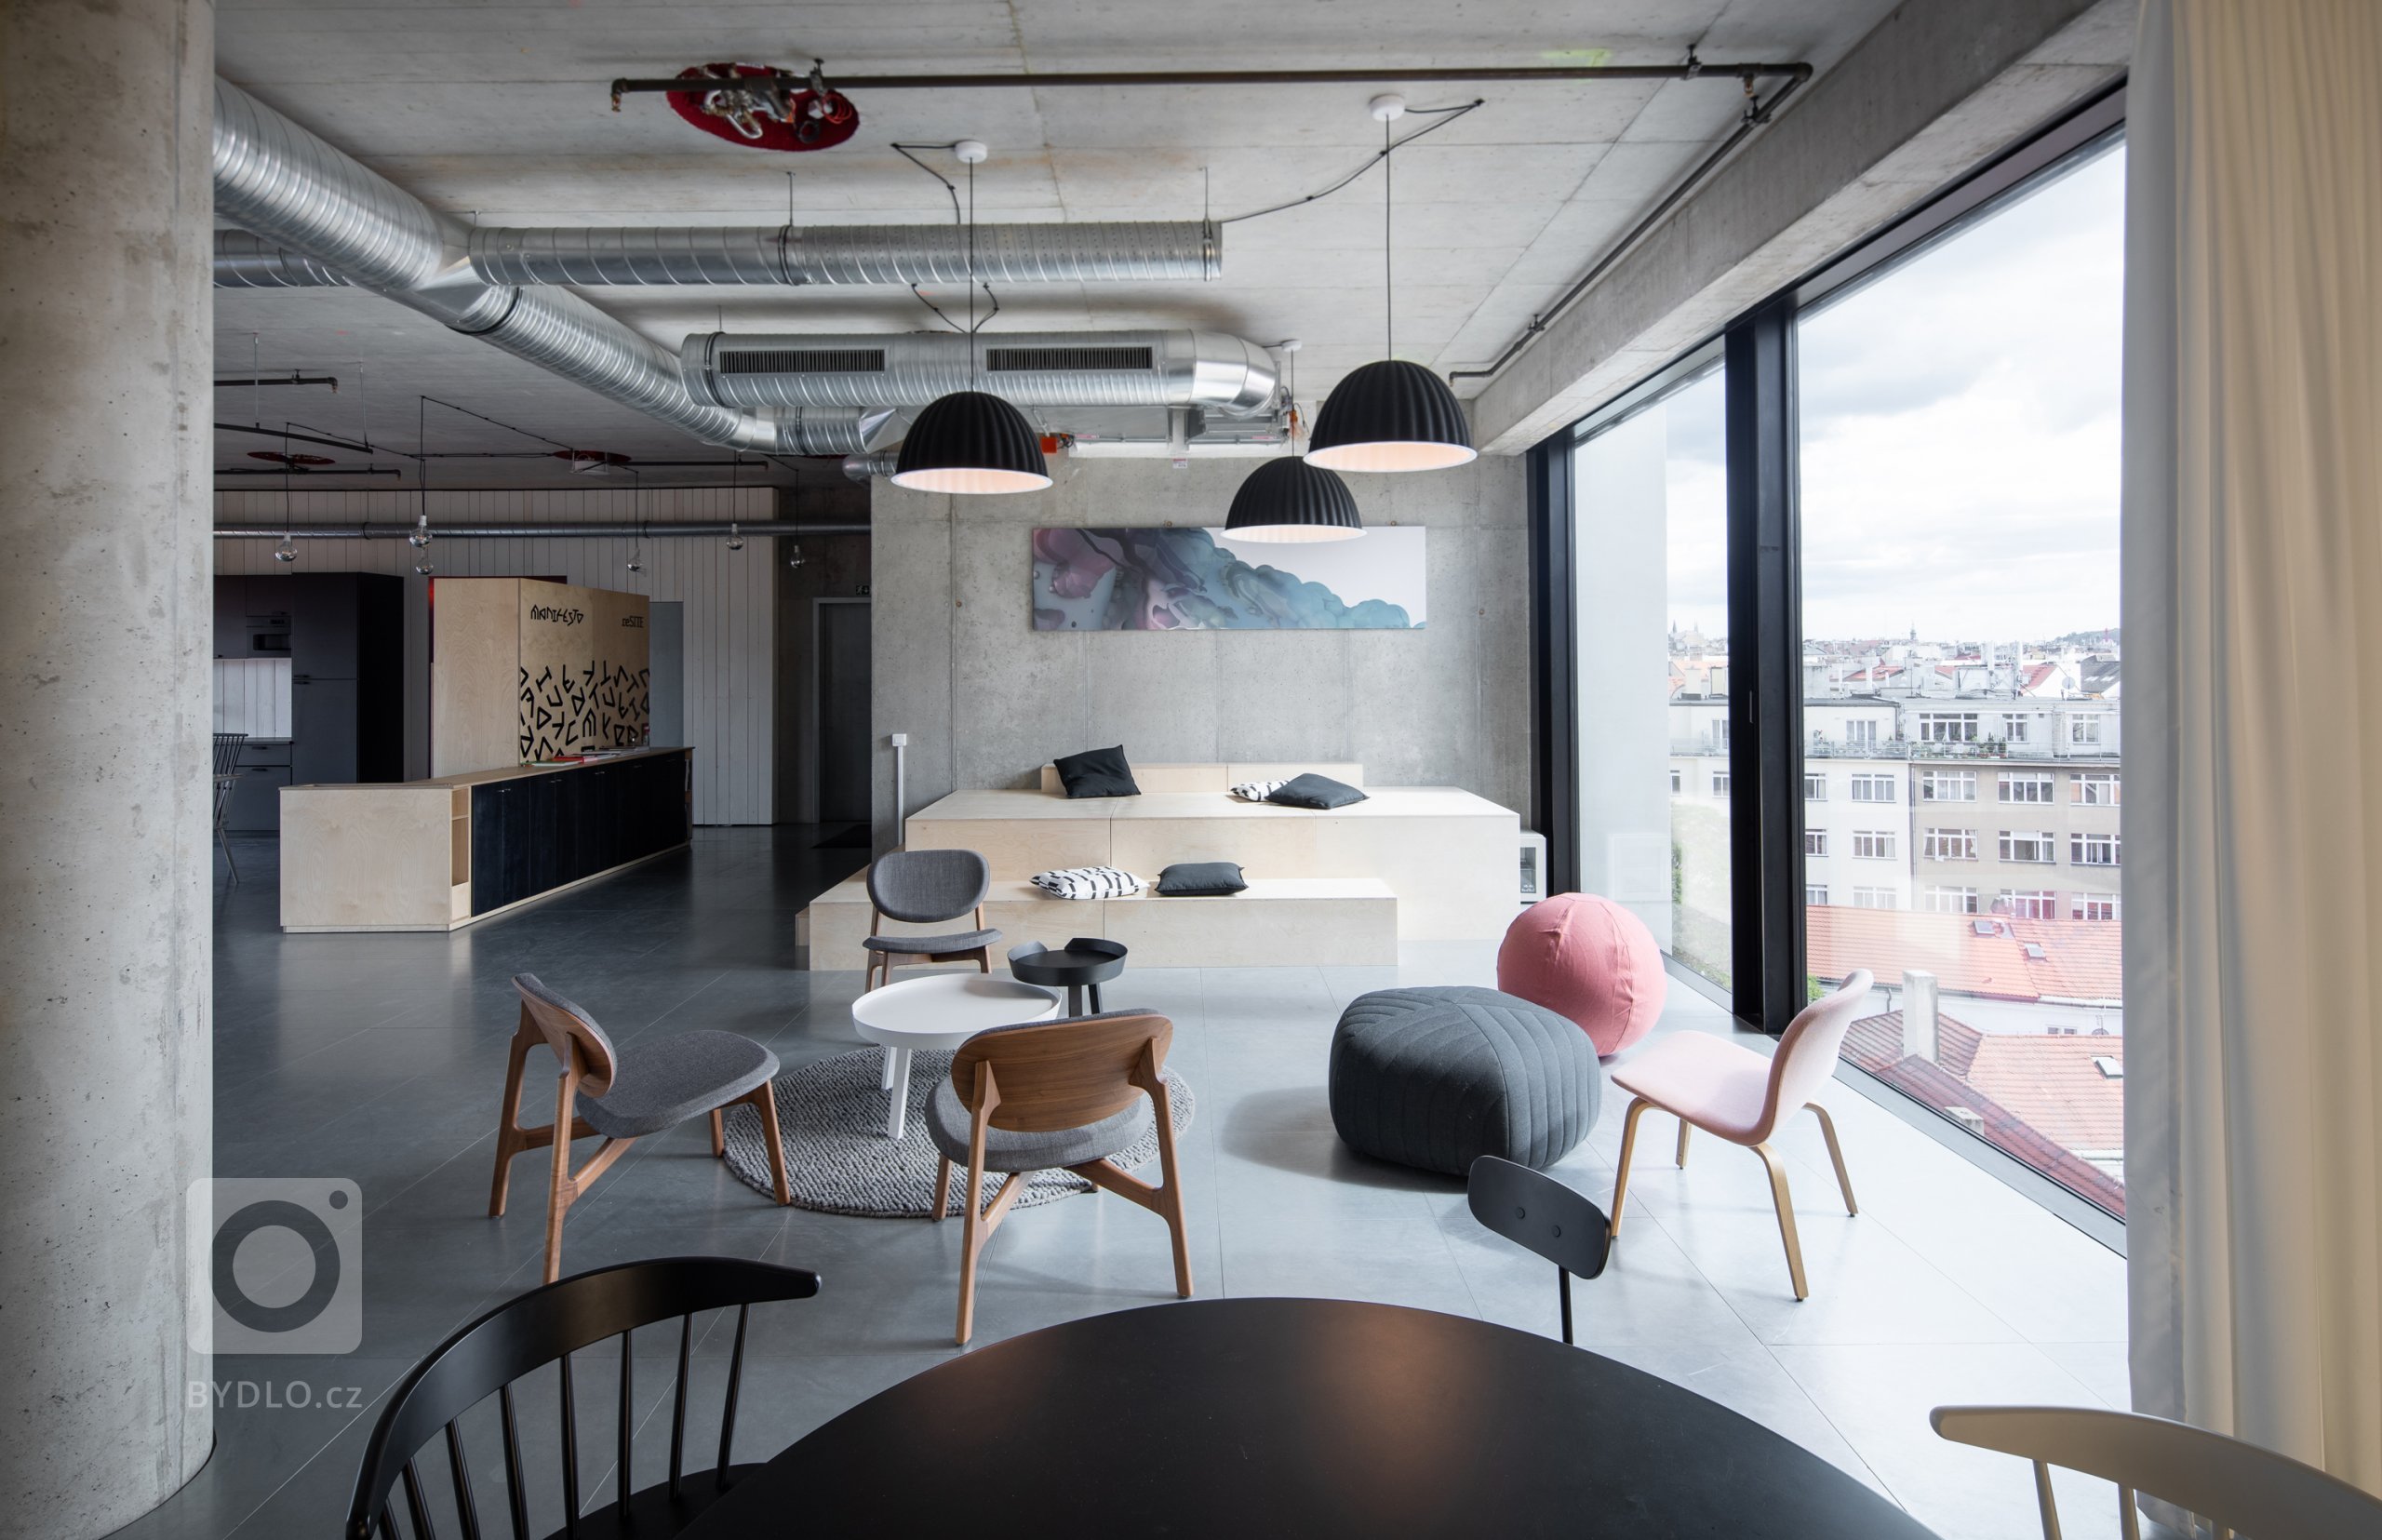 Manifesto &amp; reSITE Office - EN

The aim of the project was to design the interior of a modern open-space office. The starting points for the design were…